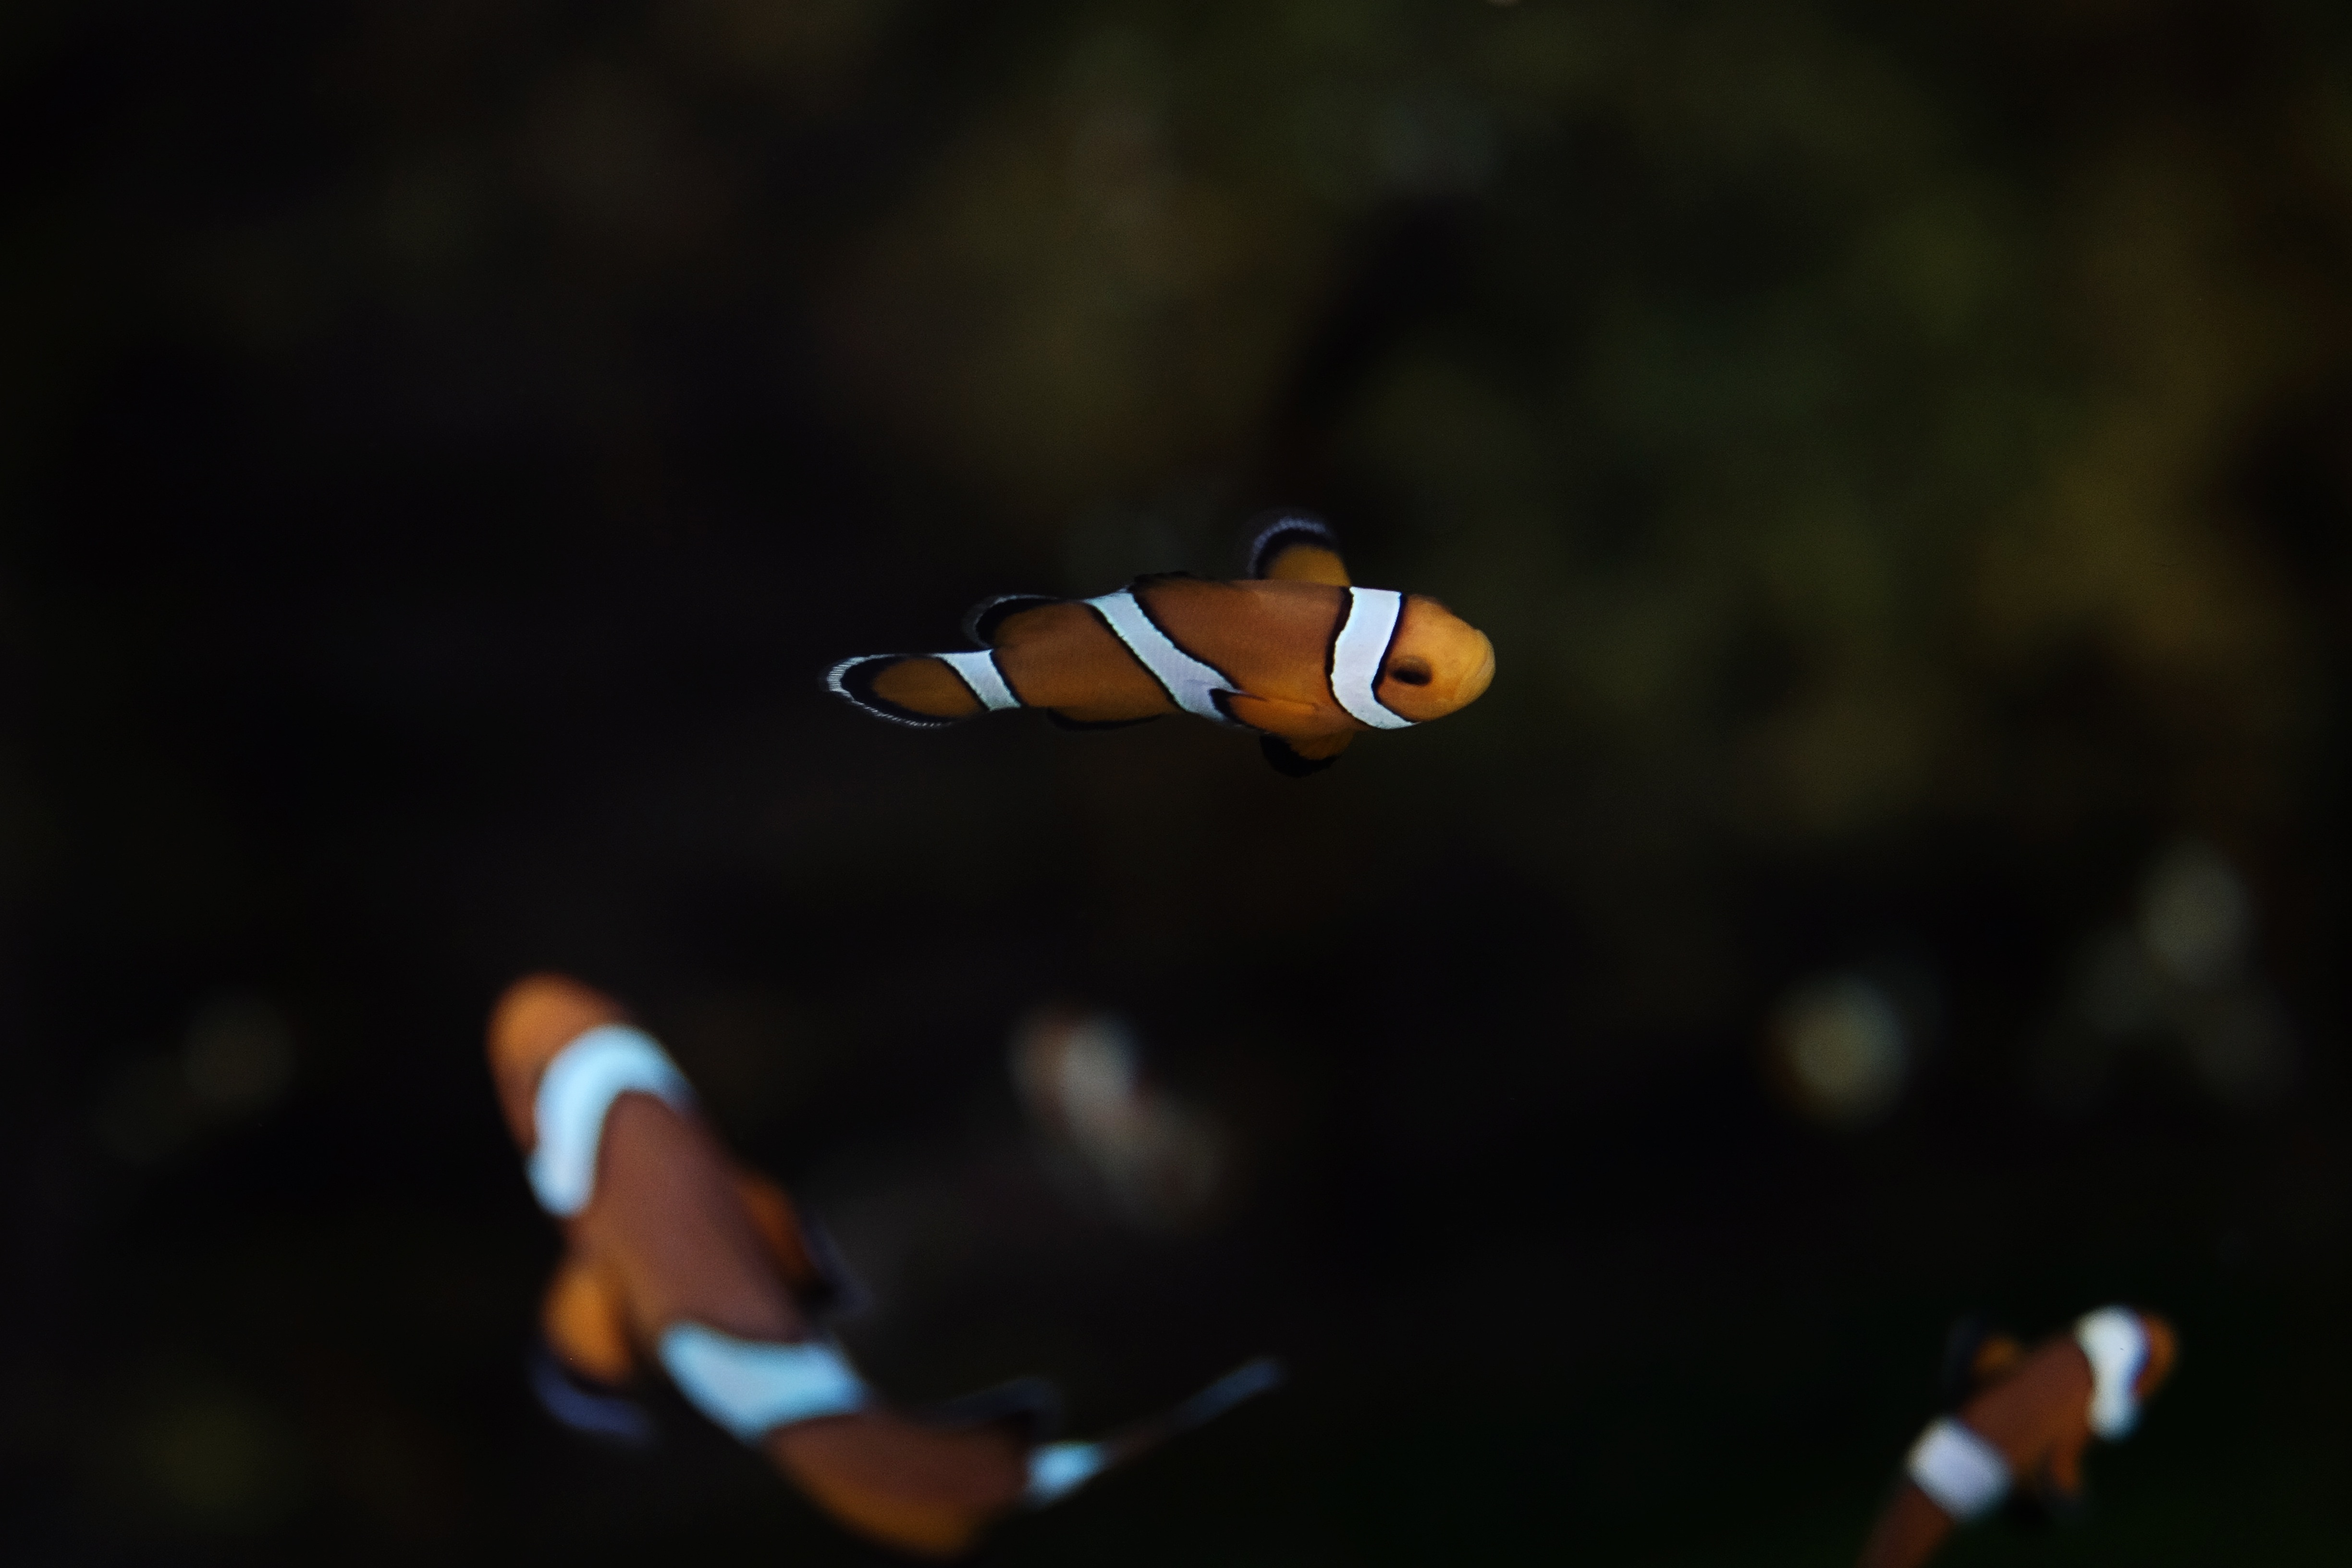 3 clown fishes